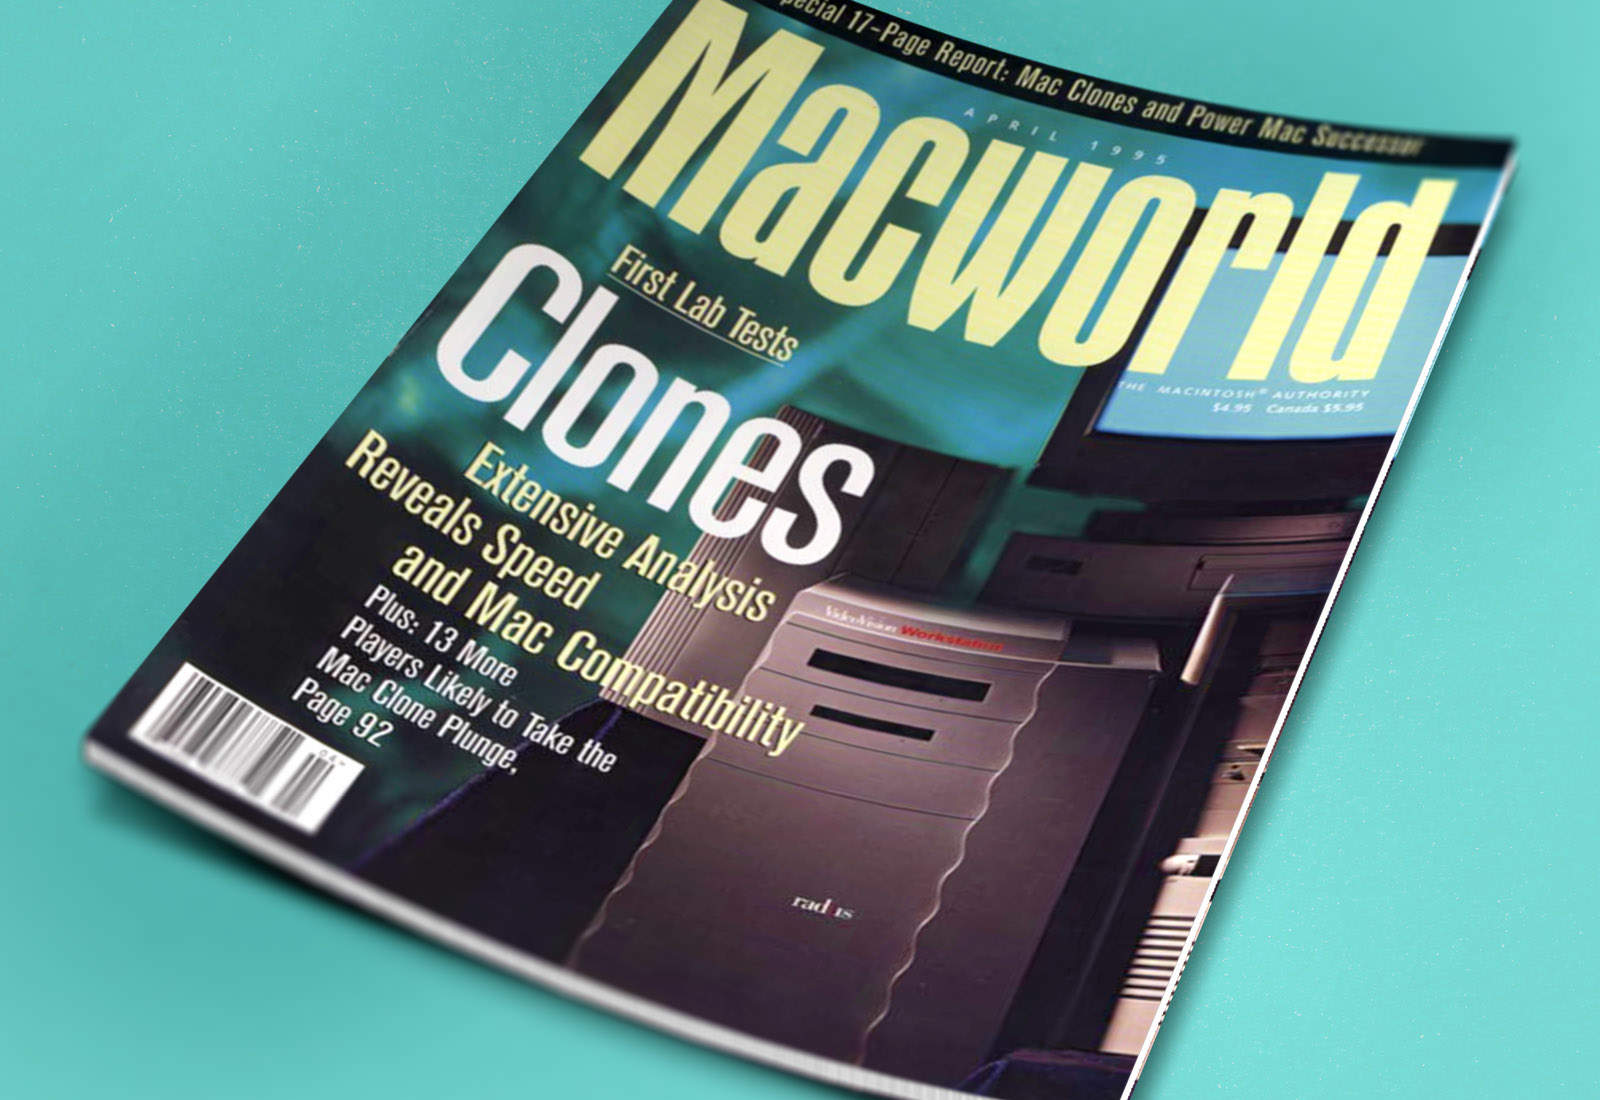 In early 1995, the Mac clone era was about to arrive!